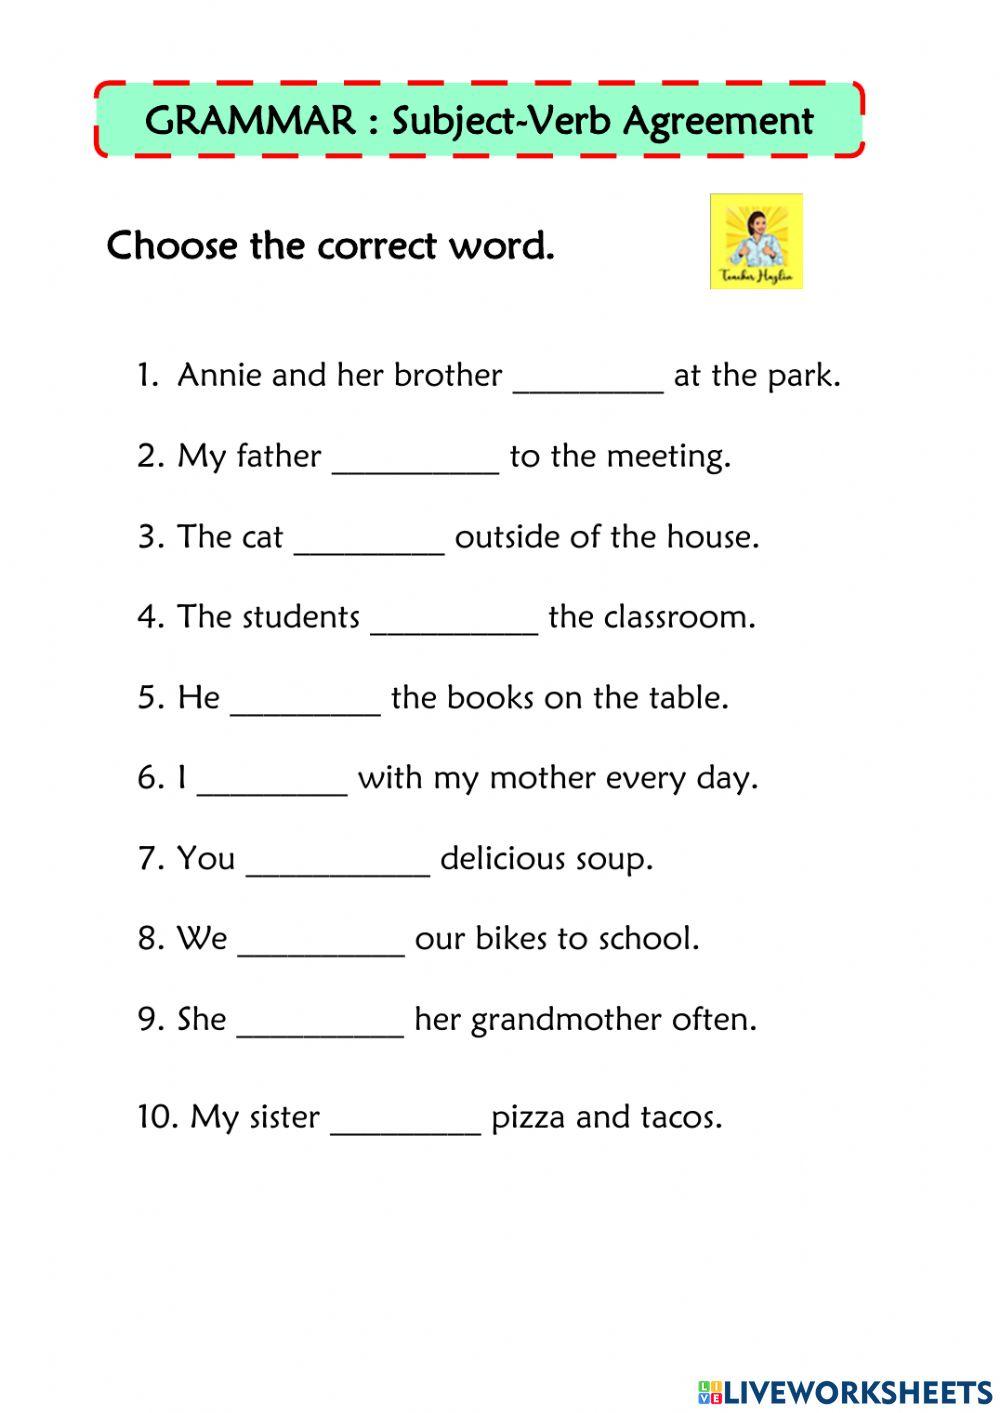 Subject verb agreement